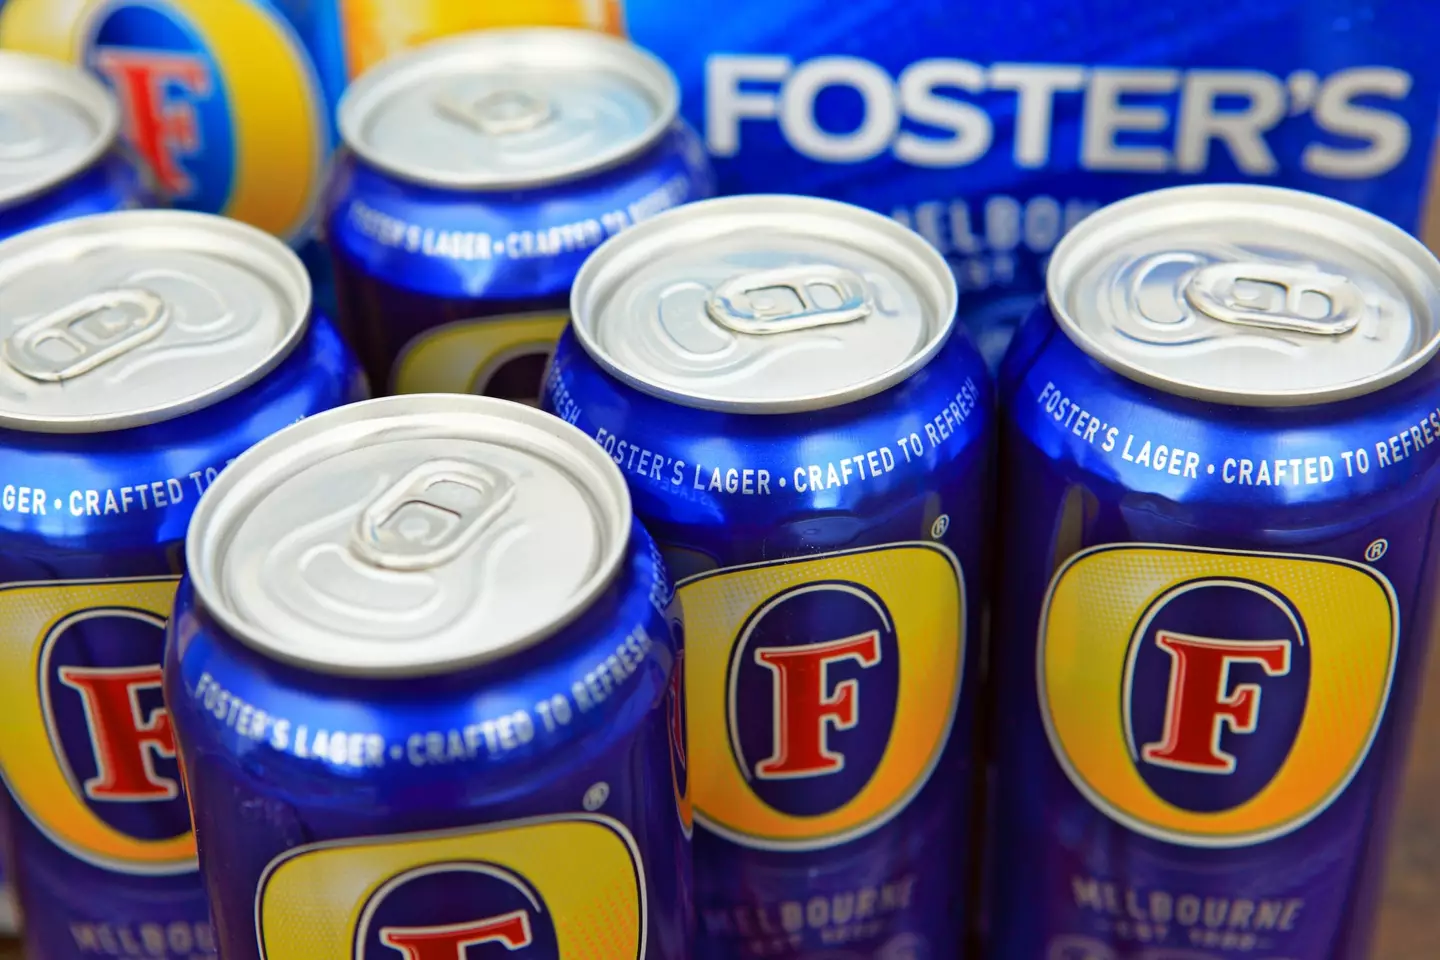 If you're drinking Foster's in the UK it's likely from Manchester, and you're probably not Australian.